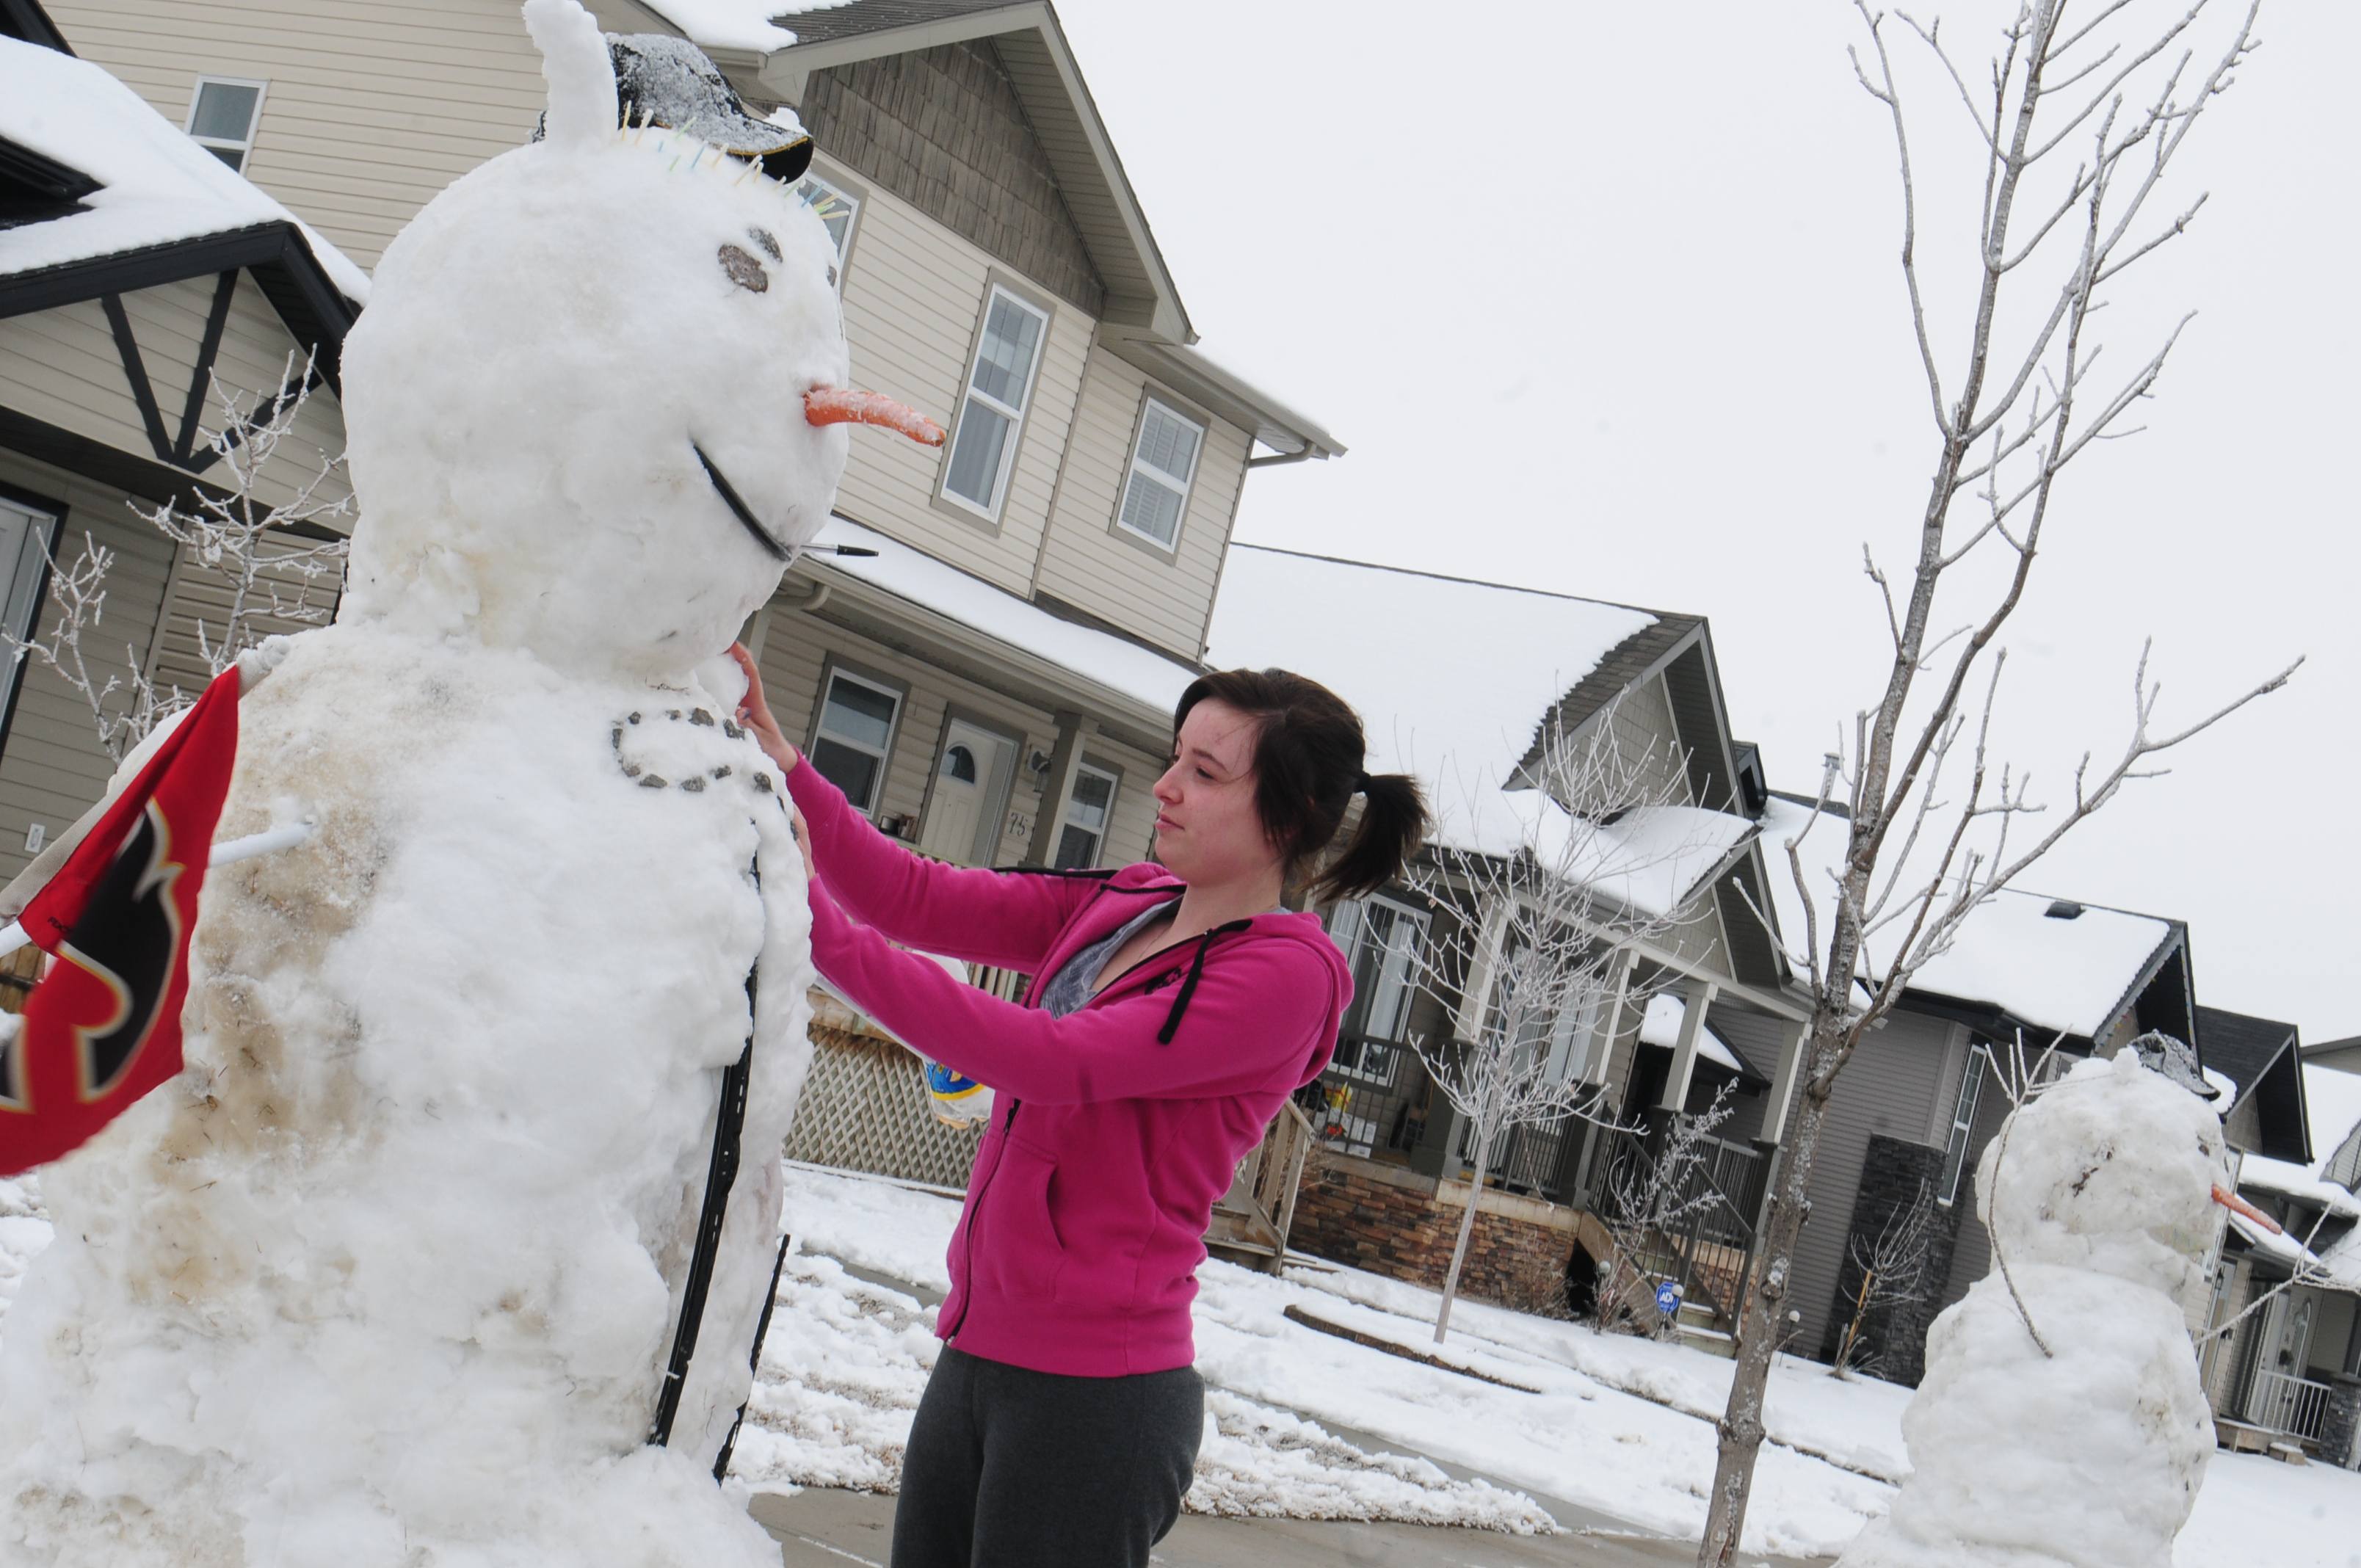 SNOW GIANTS- Brayanne Dawe fixes one of the giant snowmen that her boyfriend and his friend built in their front yard recently to get most of the snow off of the lawn.